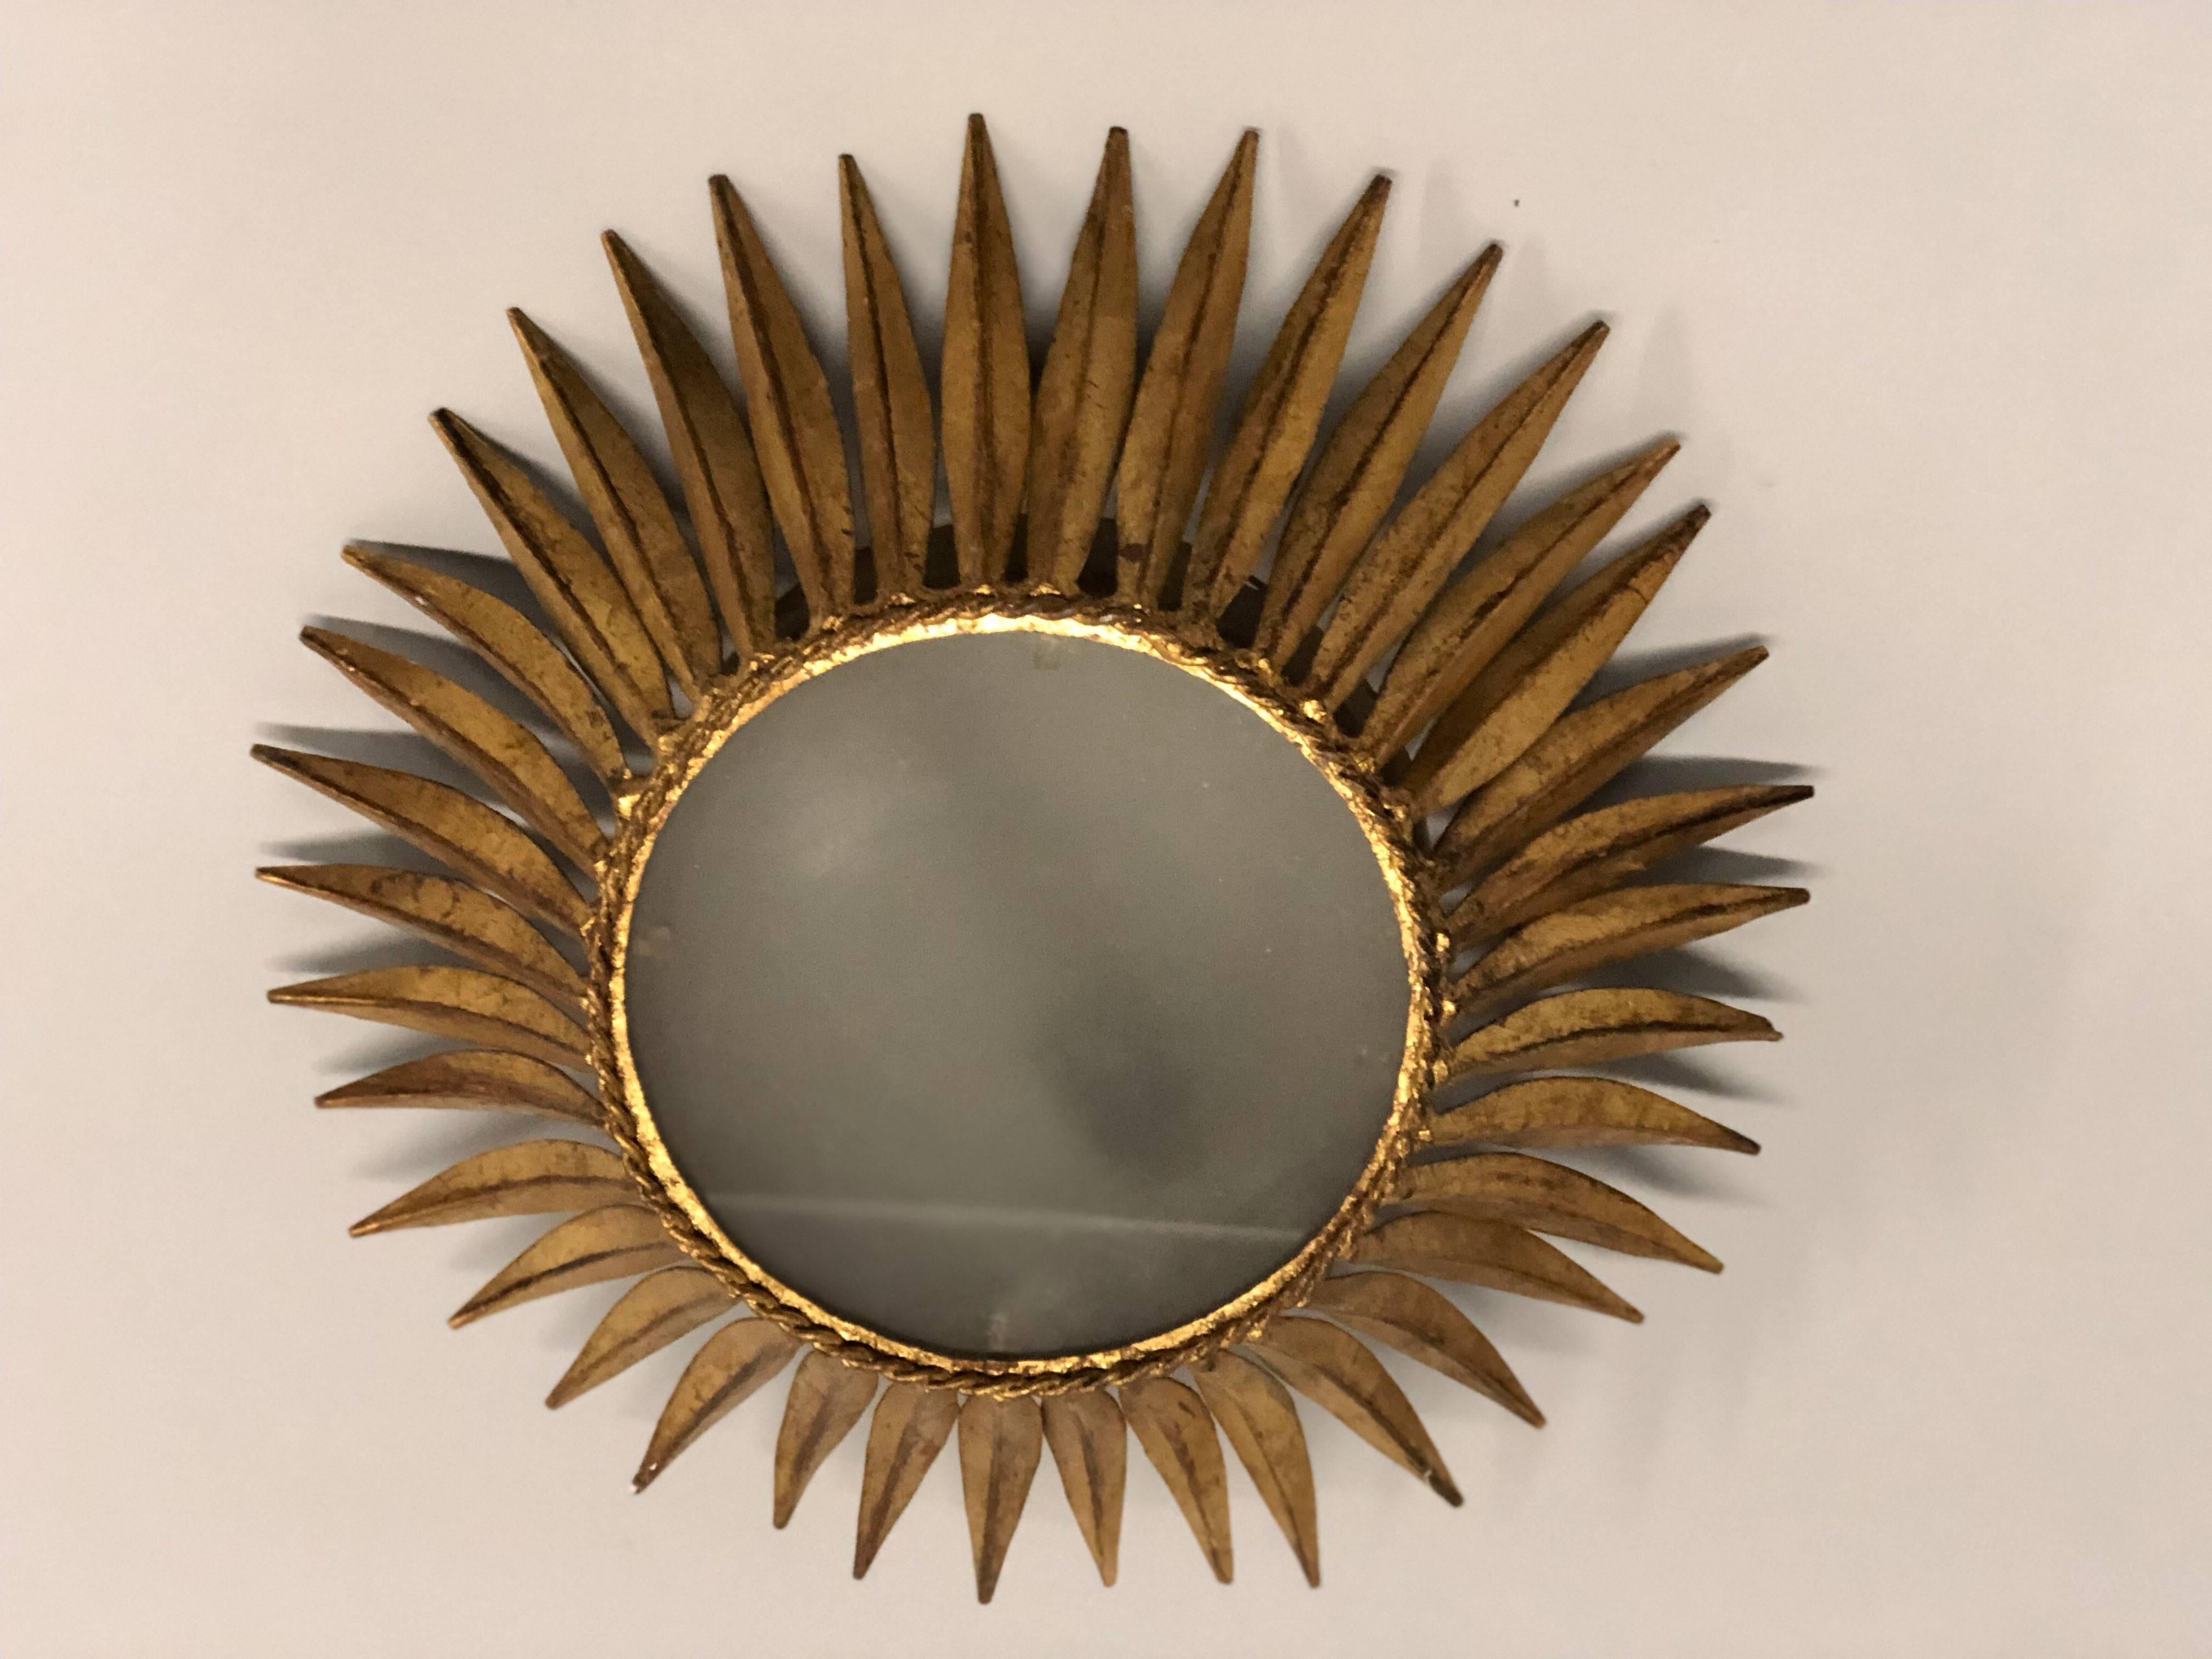 Pair of French Mid-Century Modern neoclassical style gilt iron sunburst / starburst flush mount / pendants. 

Handmade in iron and hand gilt around a central glass shade with a concentric ring of tapered leaves forming a crown or sunburst. These